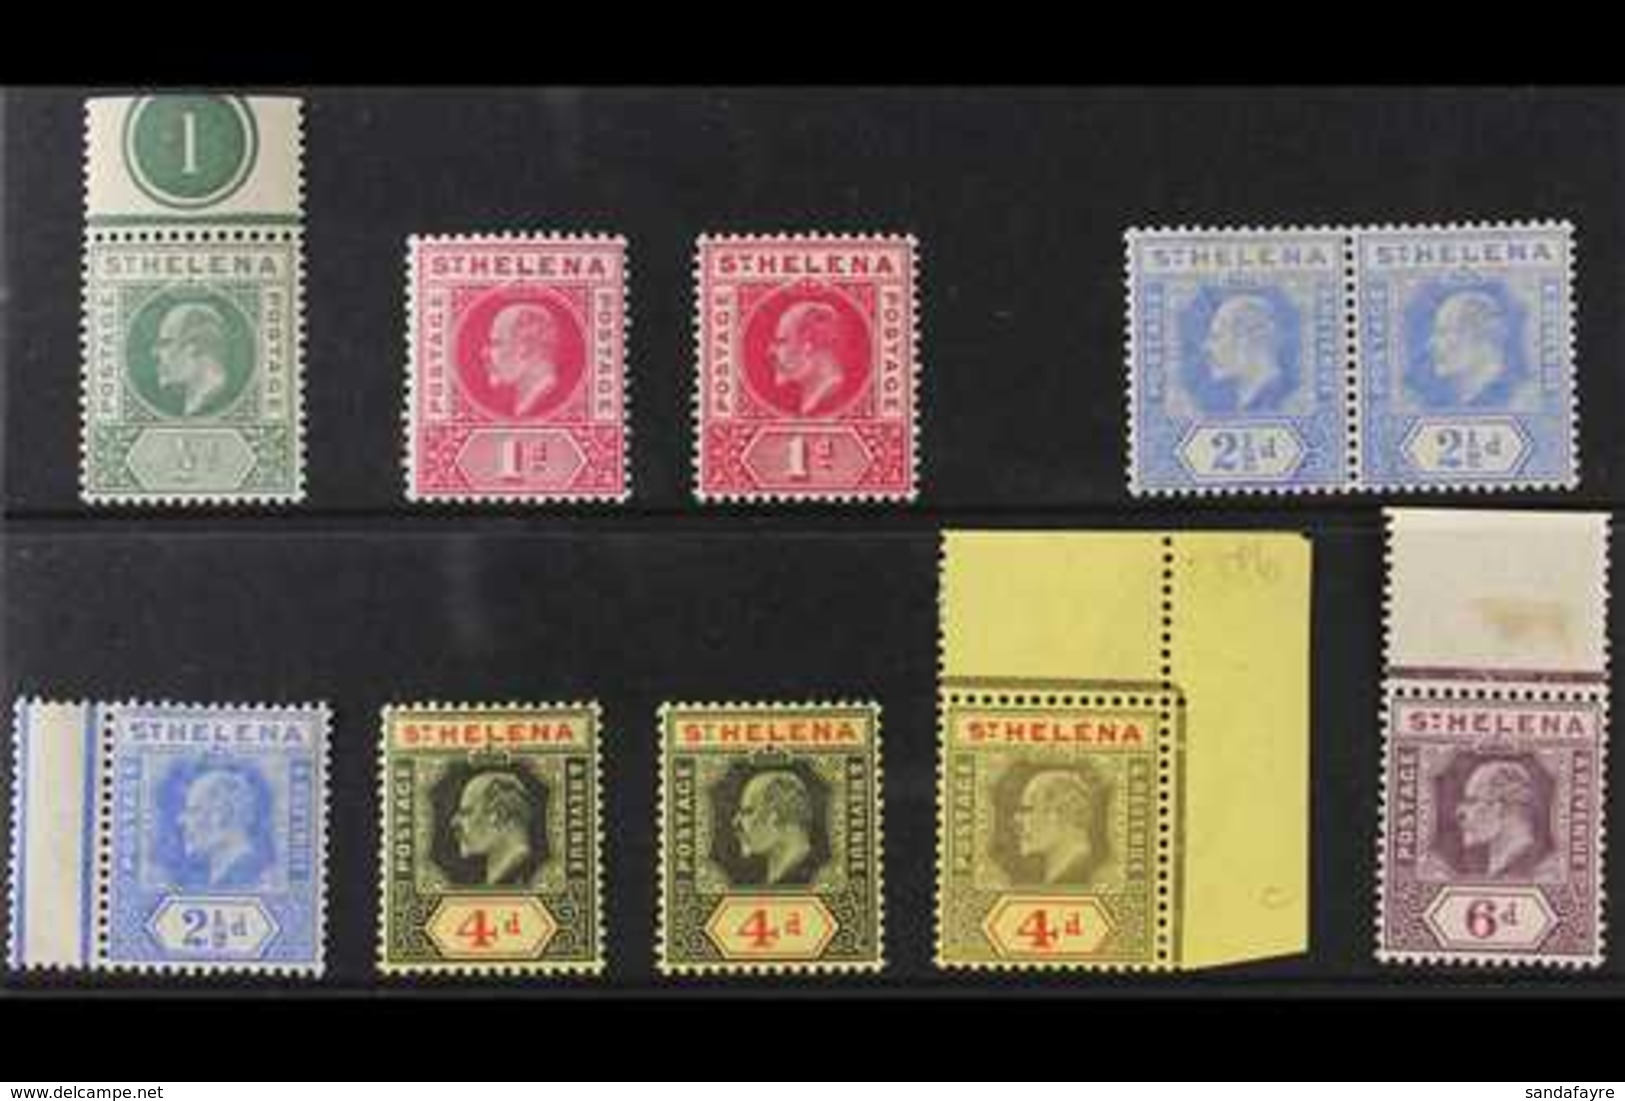 1902-11 NHM DEFINITIVES. An Attractive Selection Of KEVII Definitives Presented On A Stock Card That Includes The 1902 S - Sint-Helena